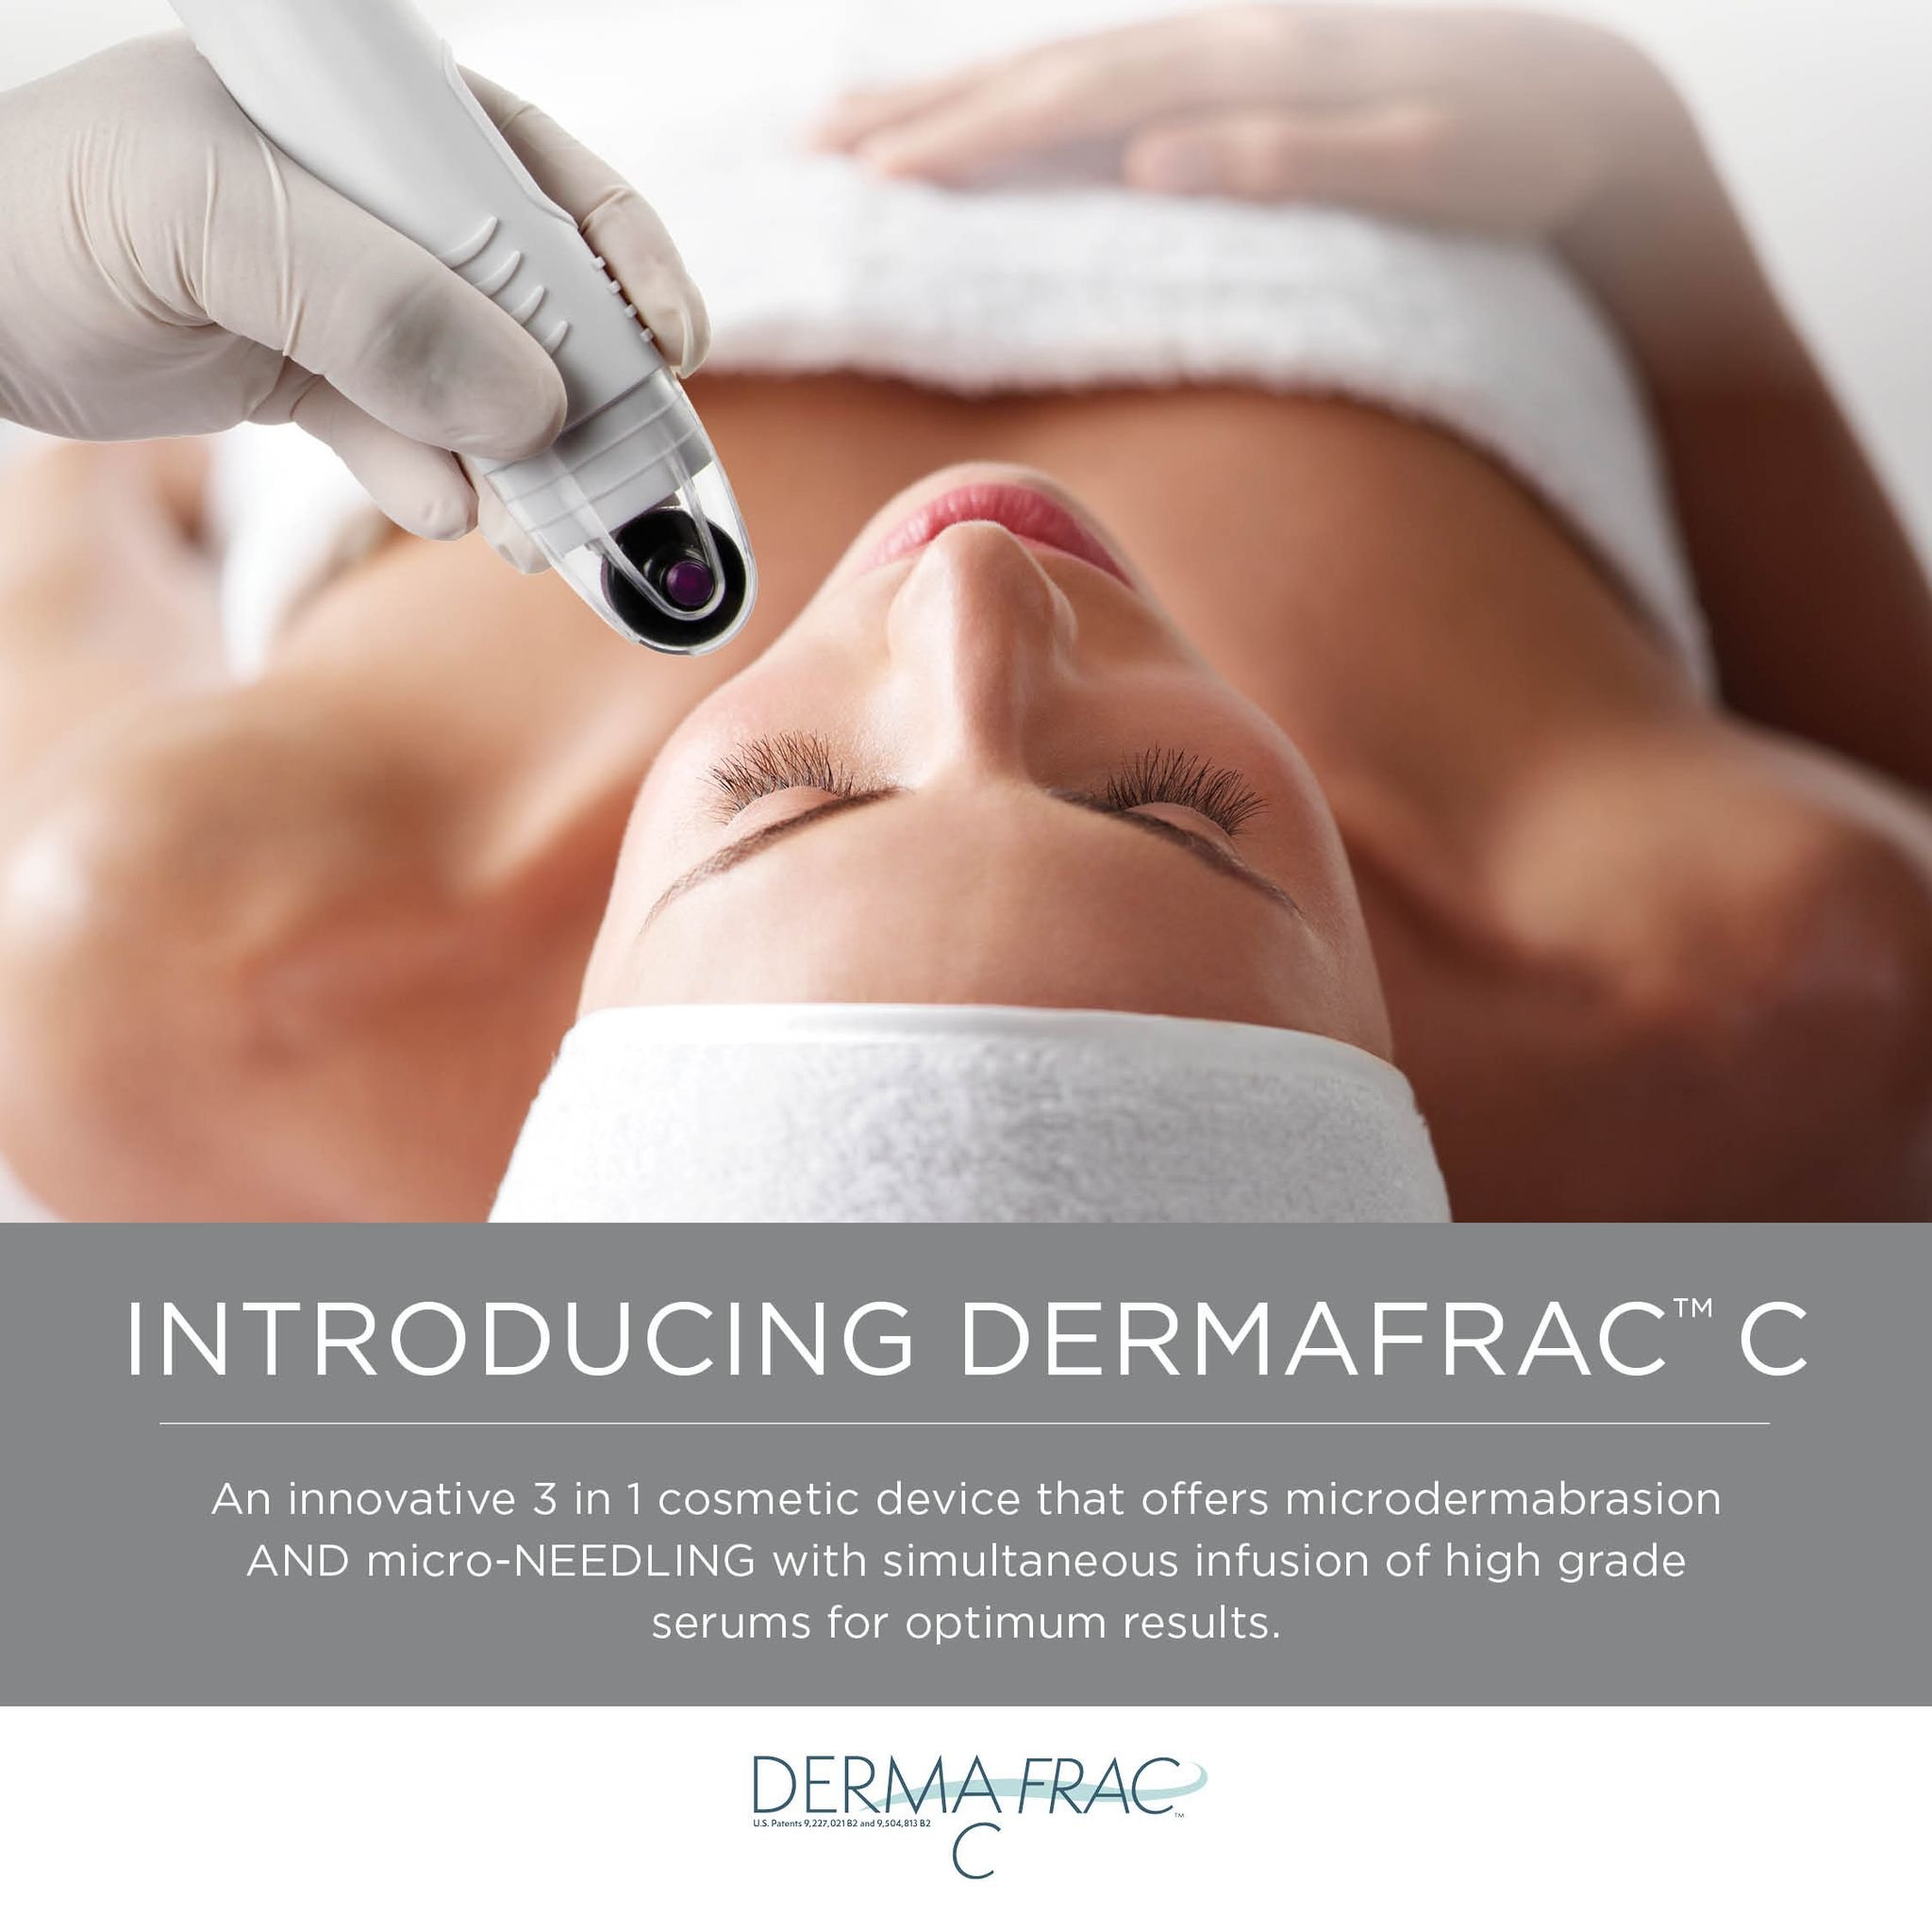 🎉 Exciting Announcement 🎉

Introducing DermaFrac Collagen Induction Therapy! 
We are offering a special price of $165 normally $220 until the end of May.✨

🤍 DermaFrac uses a disposable roller which contains superfine needles to stimulate collagen